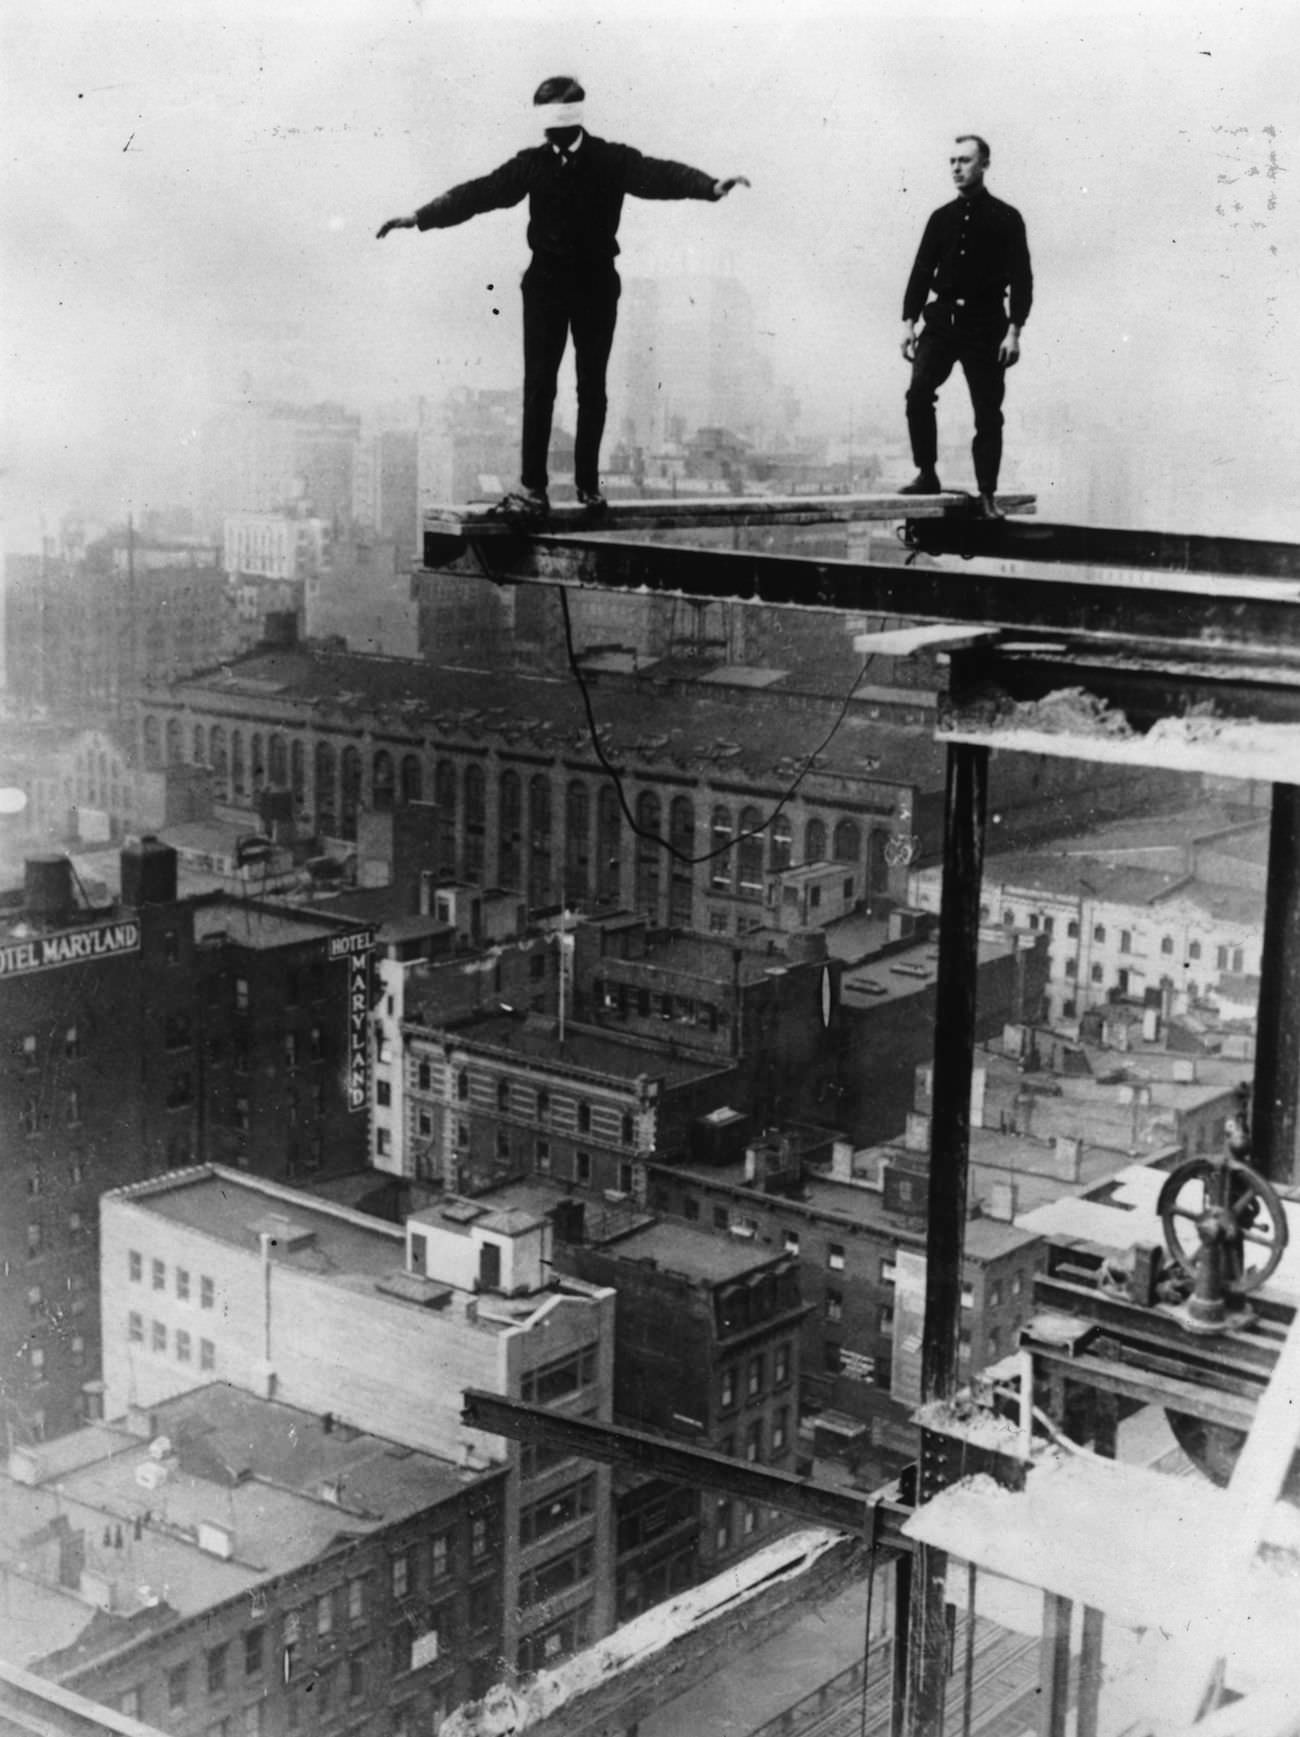 Daredevil Photos of People at The Extreme Heights from the Past that Will Make You Dizzy